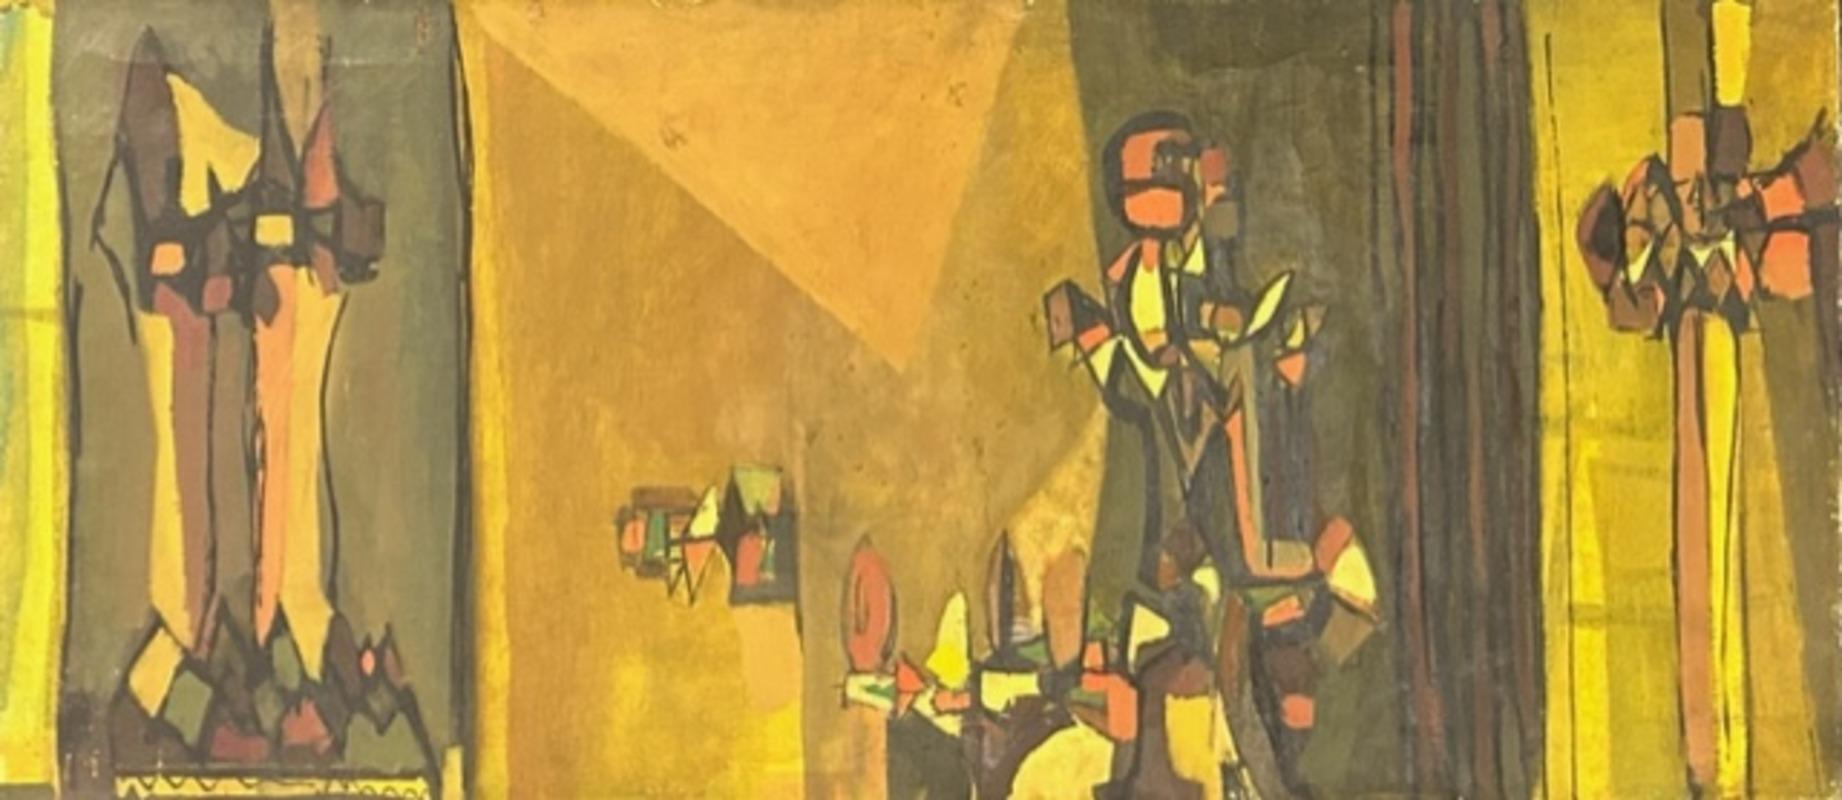 Angelo Ippolito
Untitled, 1952
Signed and dated on the reverse
Oil on canvas
16 x 36 inches

Provenance:
Gloria Torrice
Estate of the above
Liana Torrice, West Orange, New Jersey, by descent

Angelo Ippolito was an internationally exhibited painter,